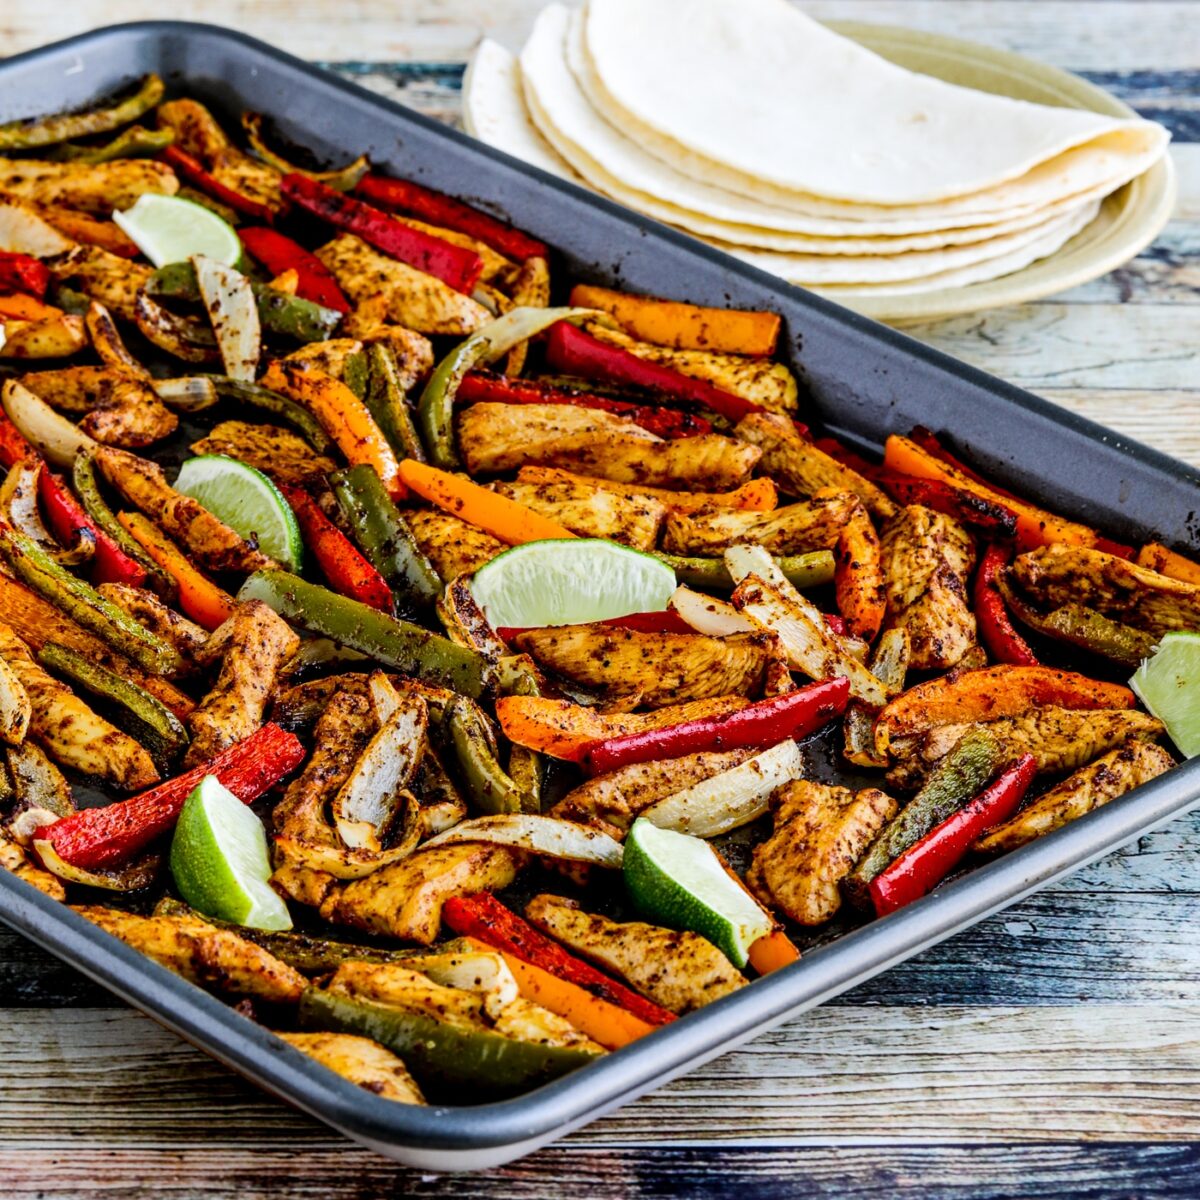 Square image of sheet bread chicken fajitas on a frying pan with tortillas on a plate